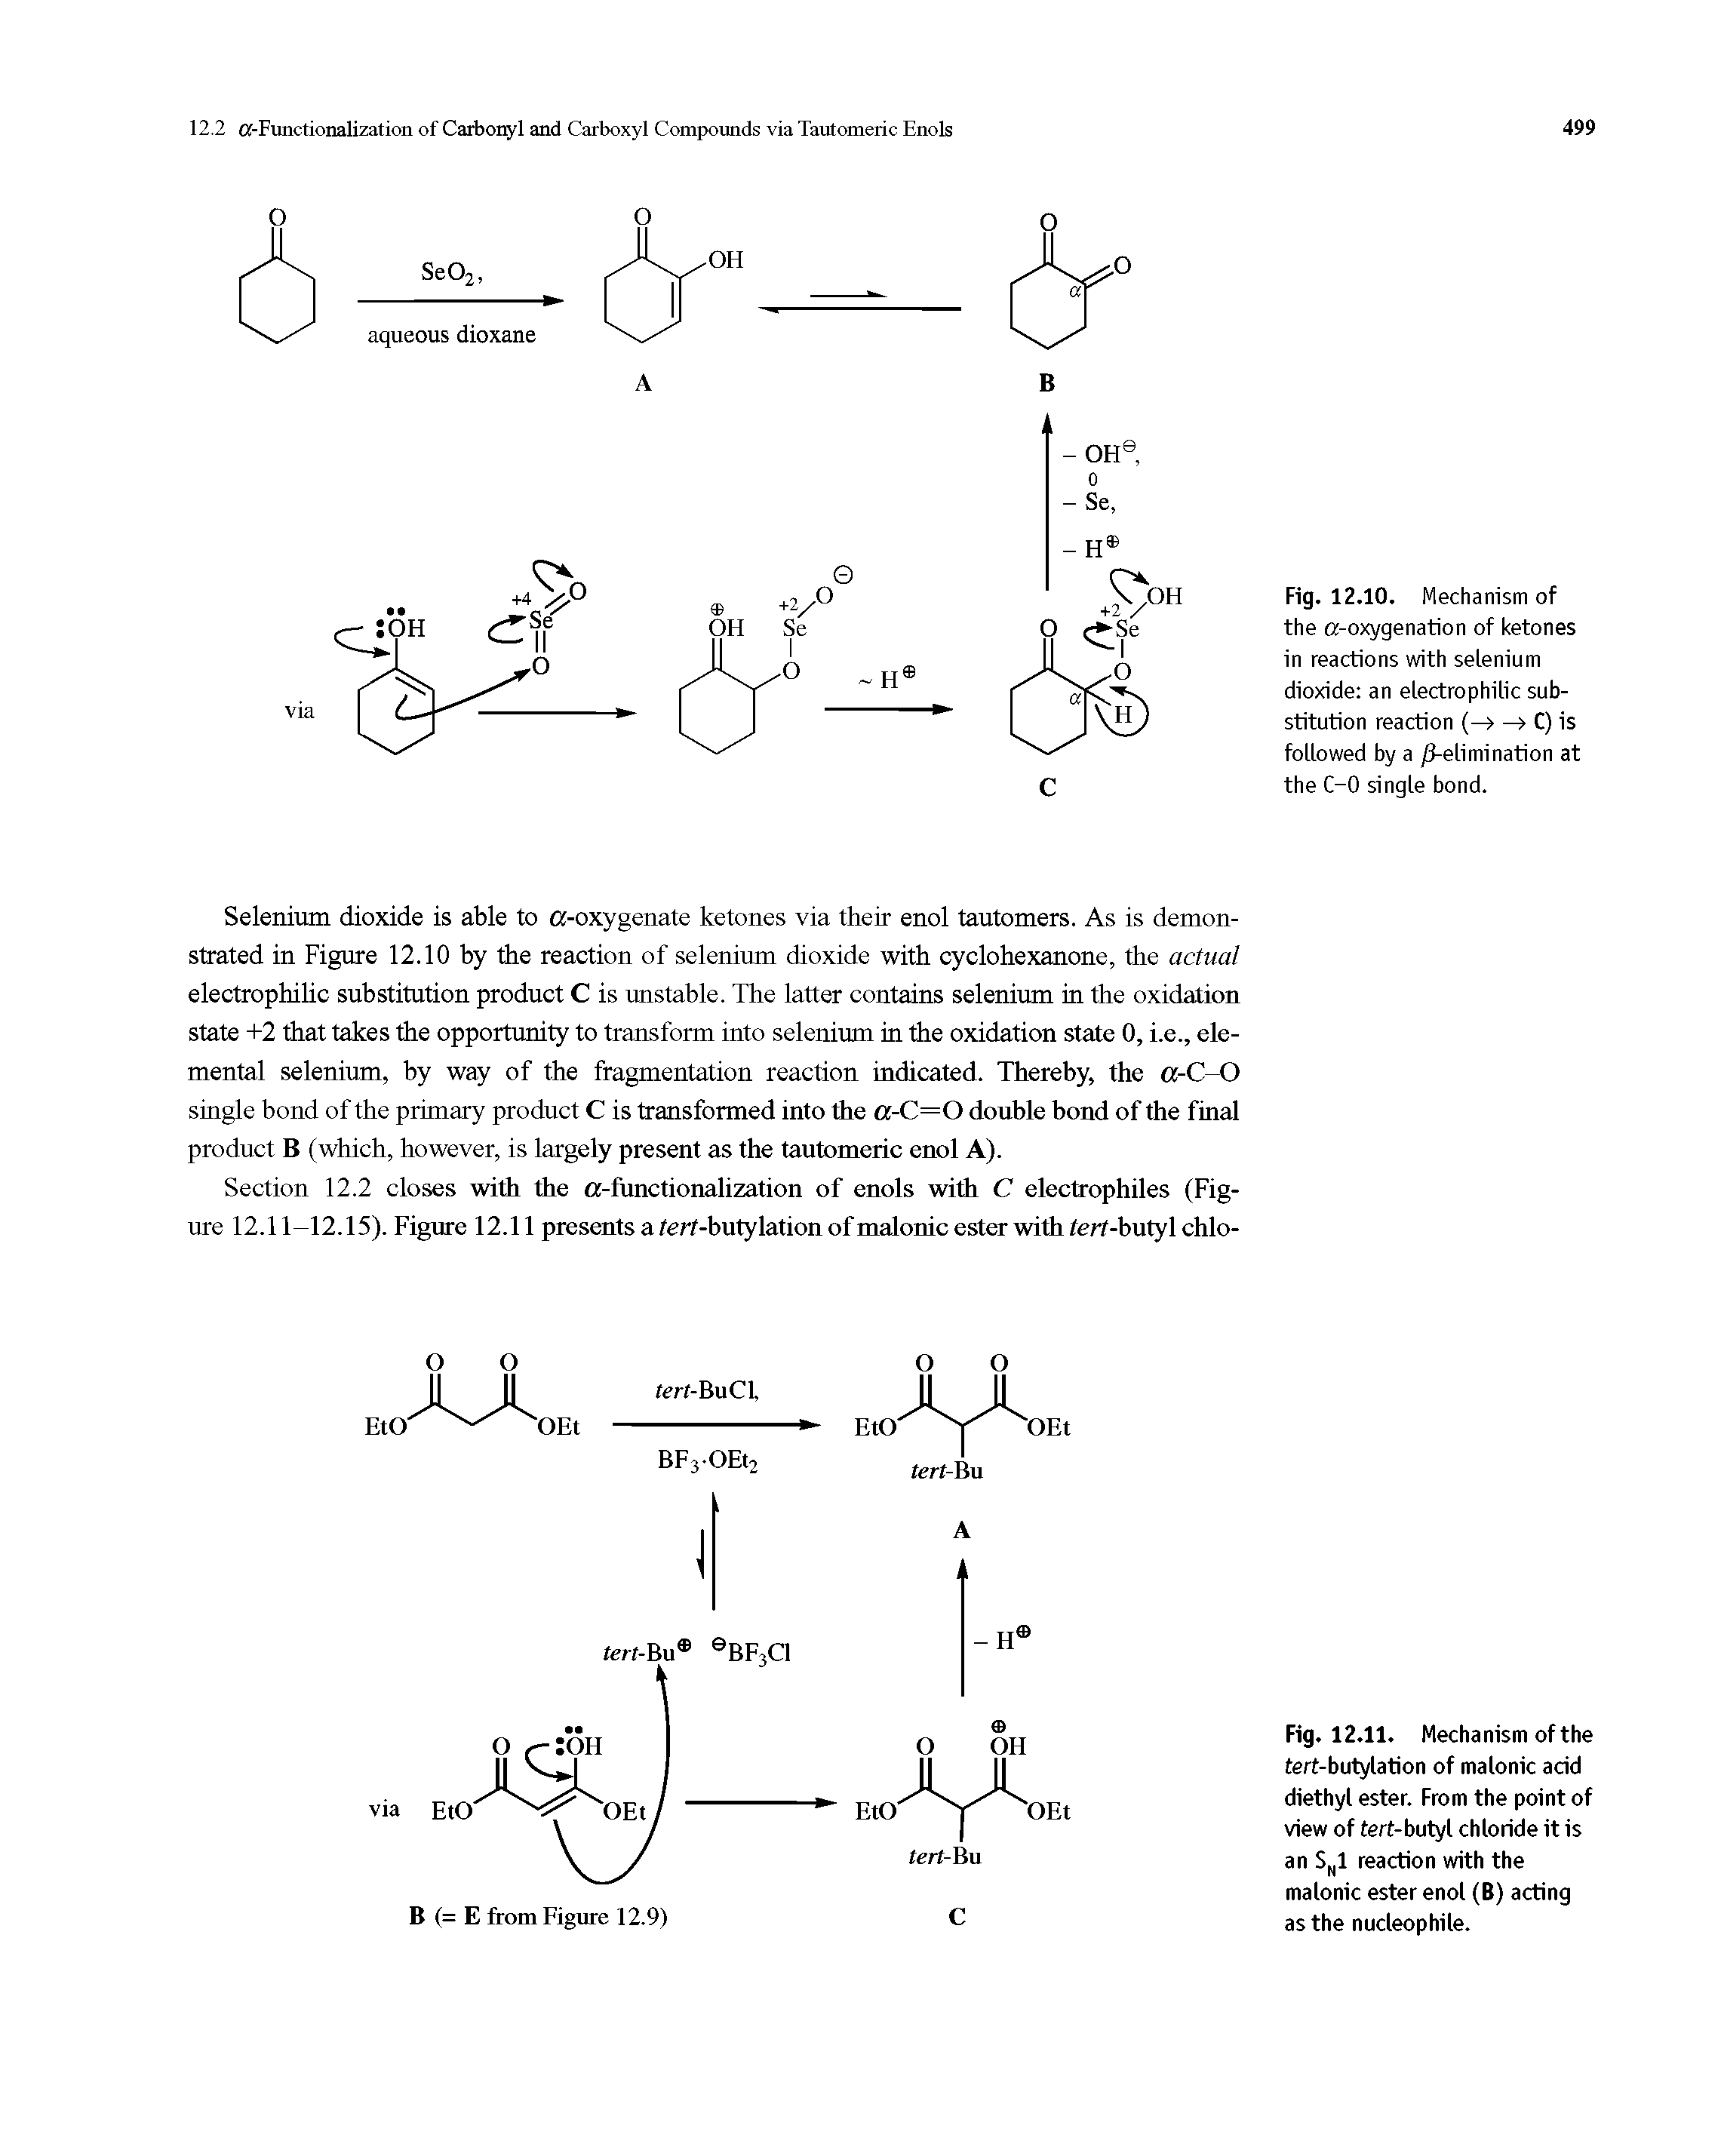 Fig. 12.10. Mechanism of the a-oxygenation of ketones in reactions with selenium dioxide an electrophilic substitution reaction (—> —> C) is followed by a /(-elimination at the C-0 single bond.